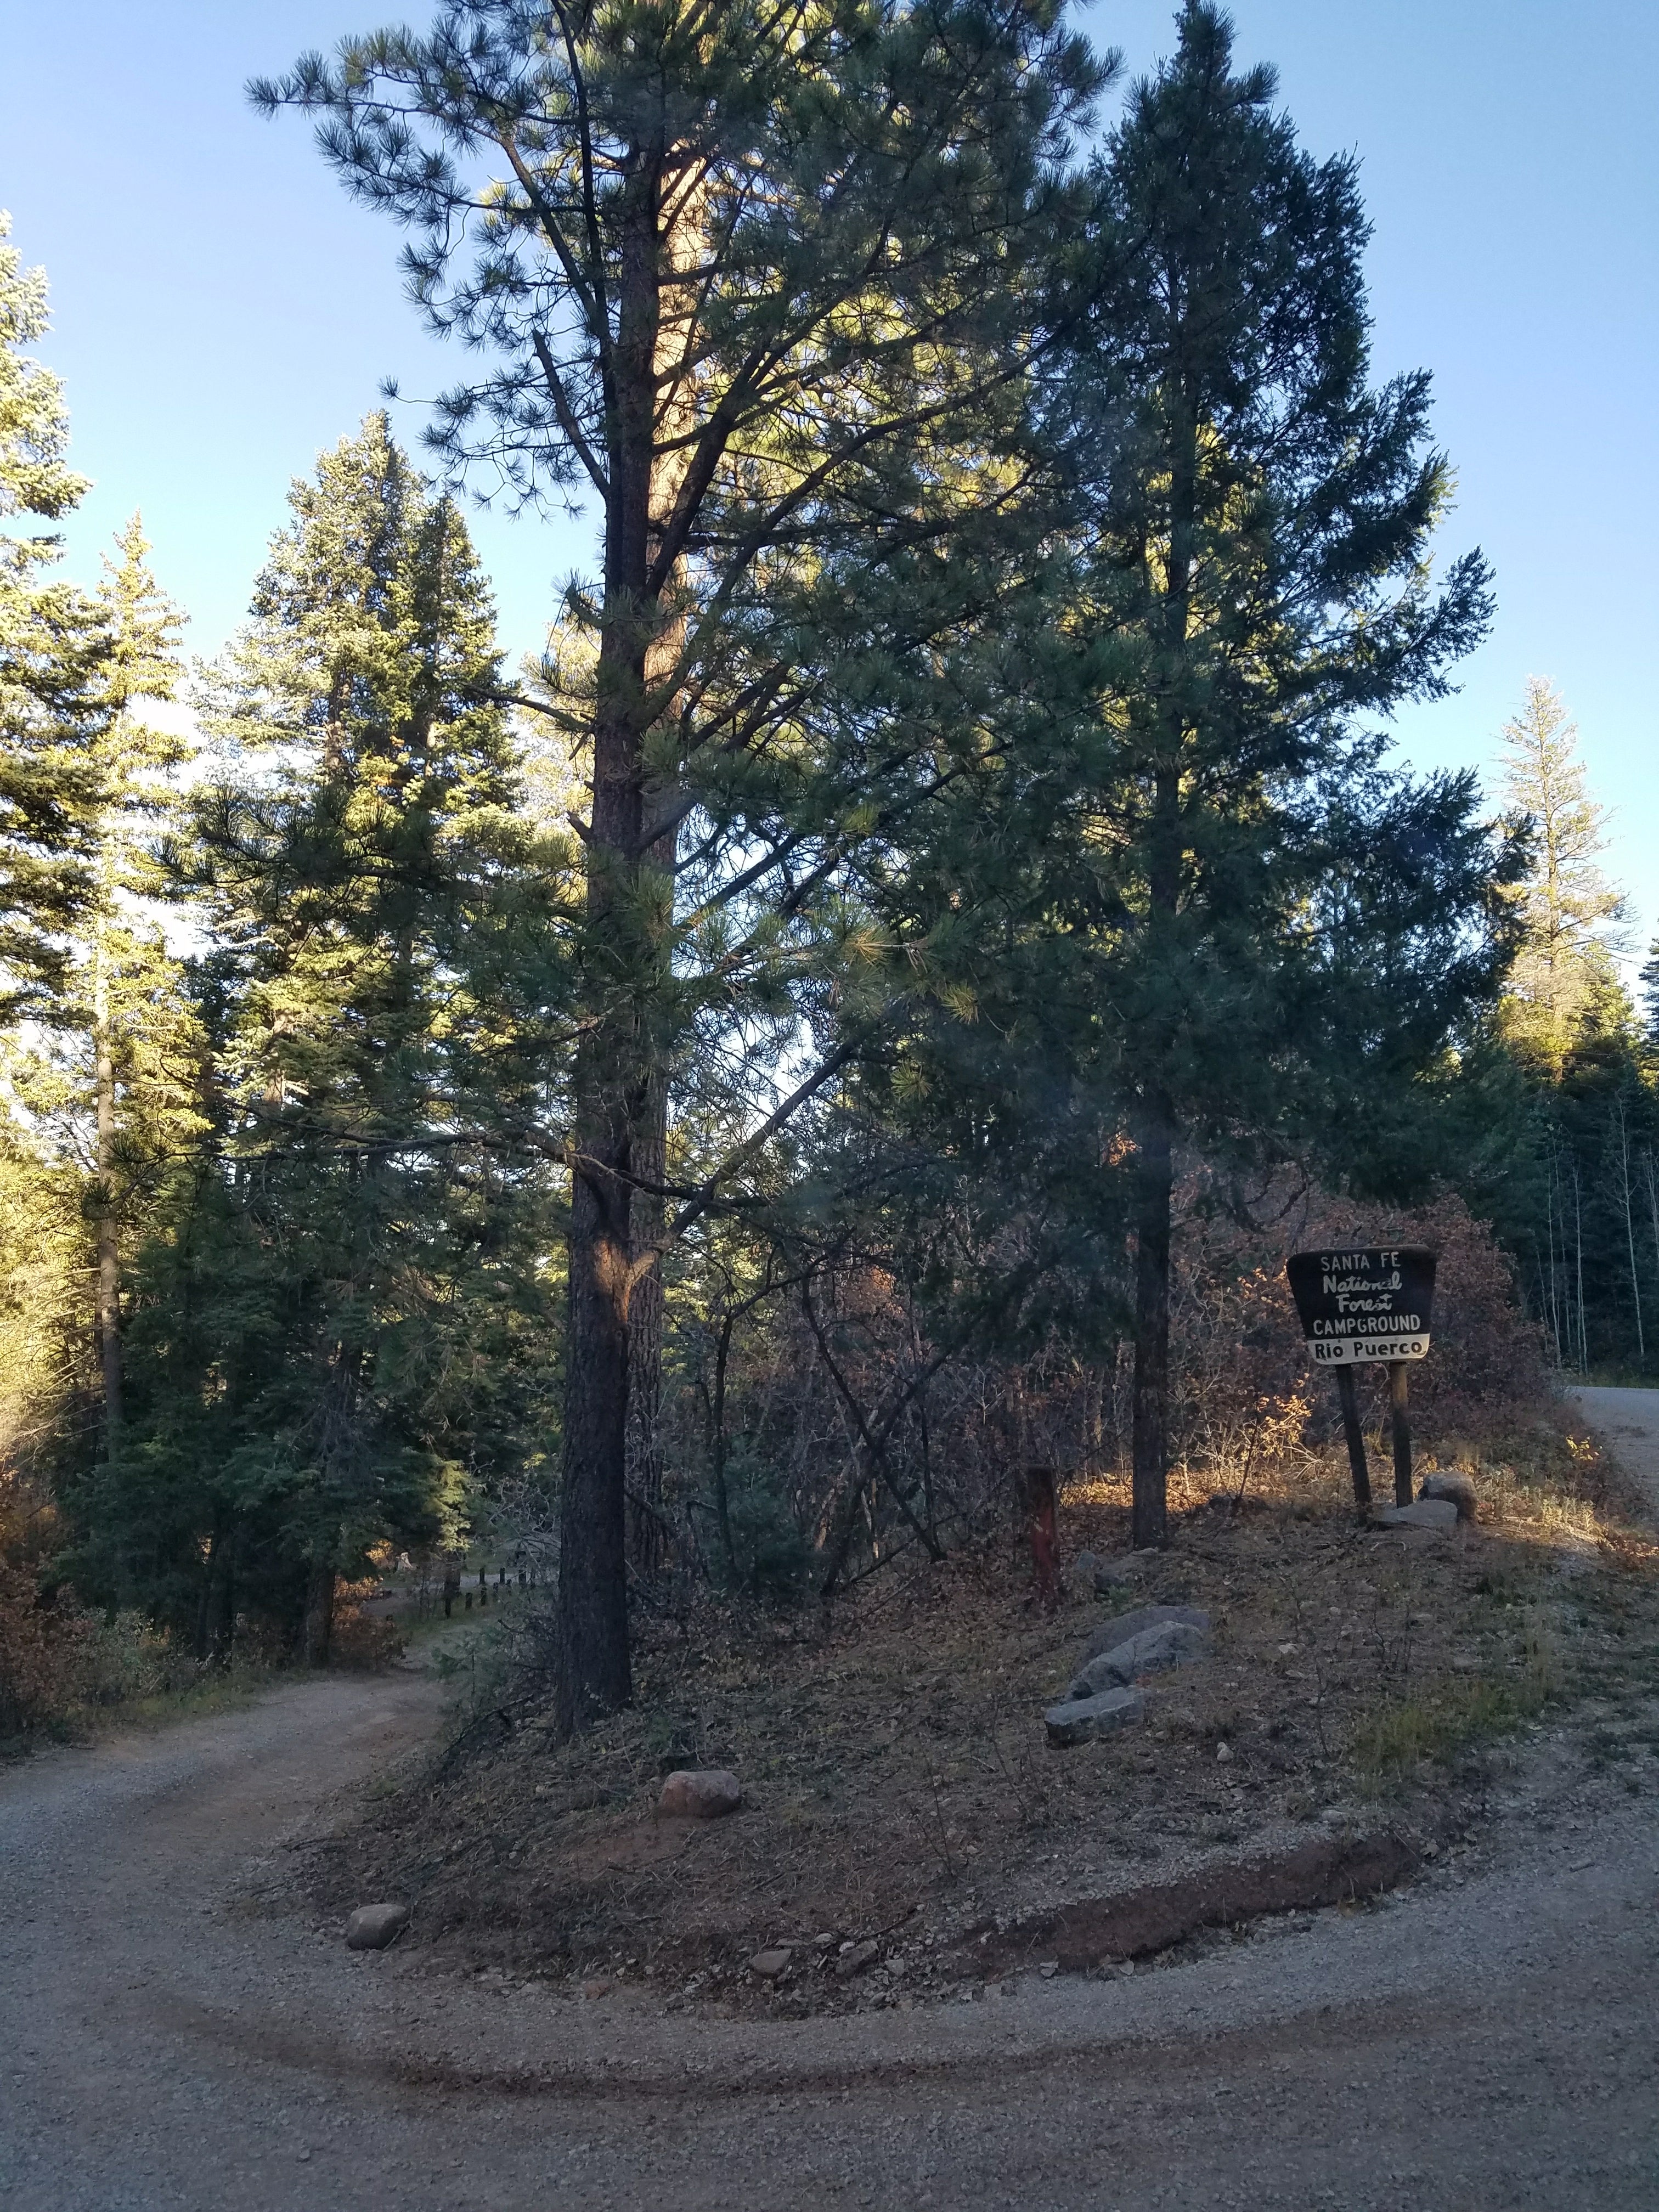 Entrance to the campground